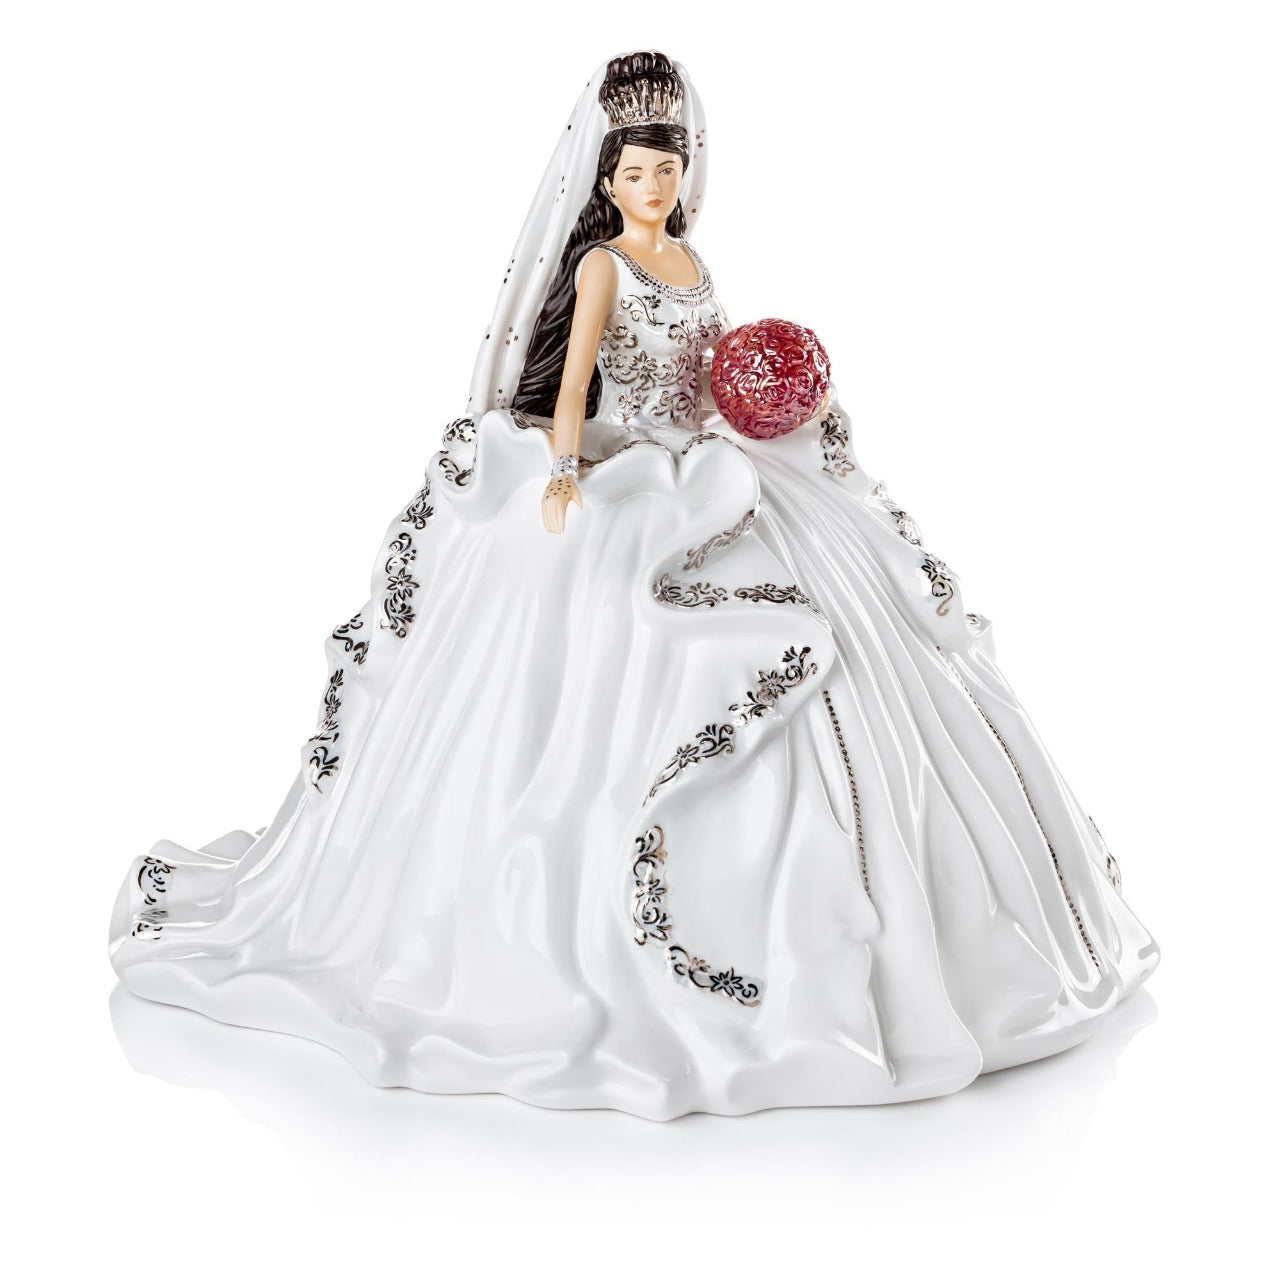 English Ladies Gypsy Affection Brunette  Gypsy Affection figurines are the latest to join the Thelma Madine range here at the English Ladies Co. This figurine is inspired by the stunning work of Thelma Madine and brings to life the style of her dresses in figurine form.